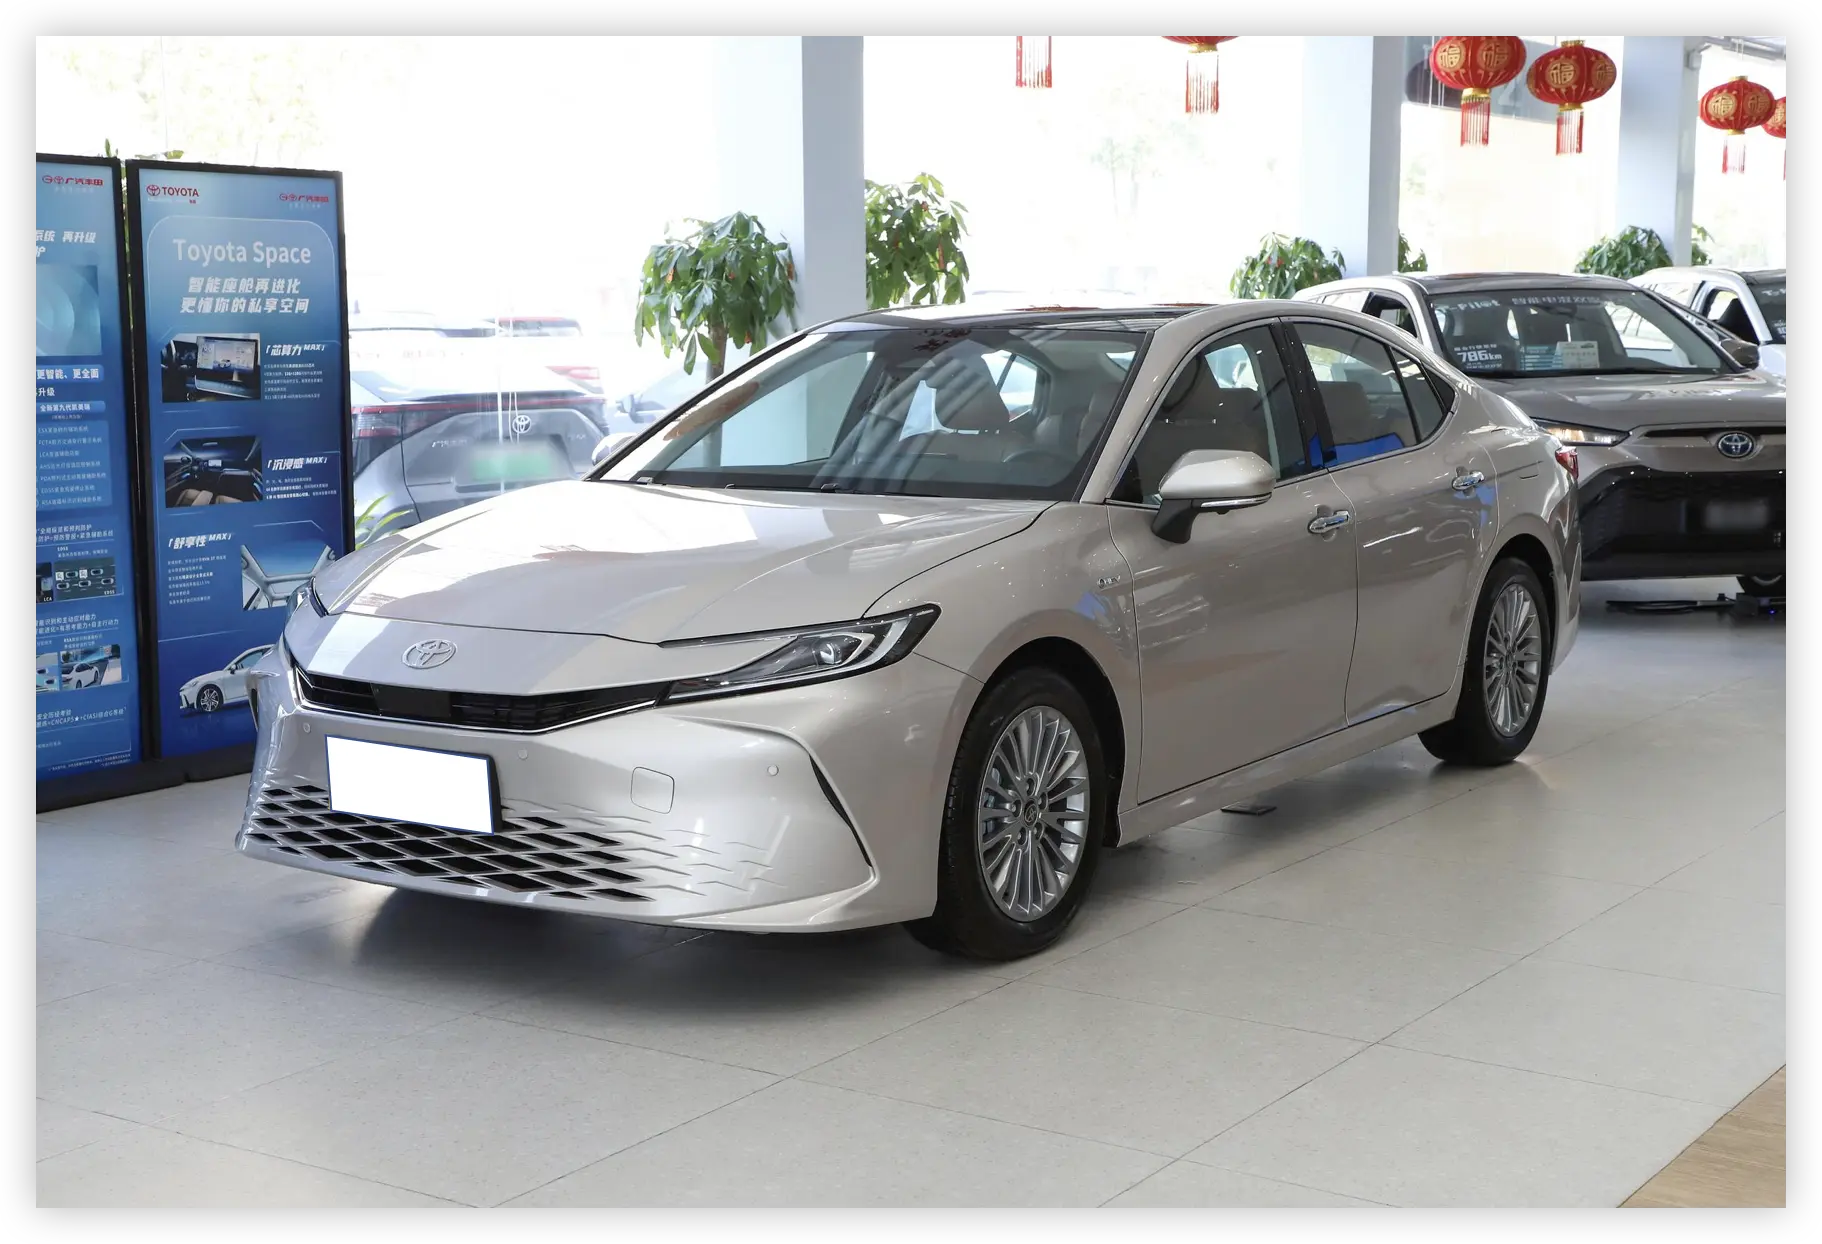 Camry hybrid with 2.0L engine for $25K